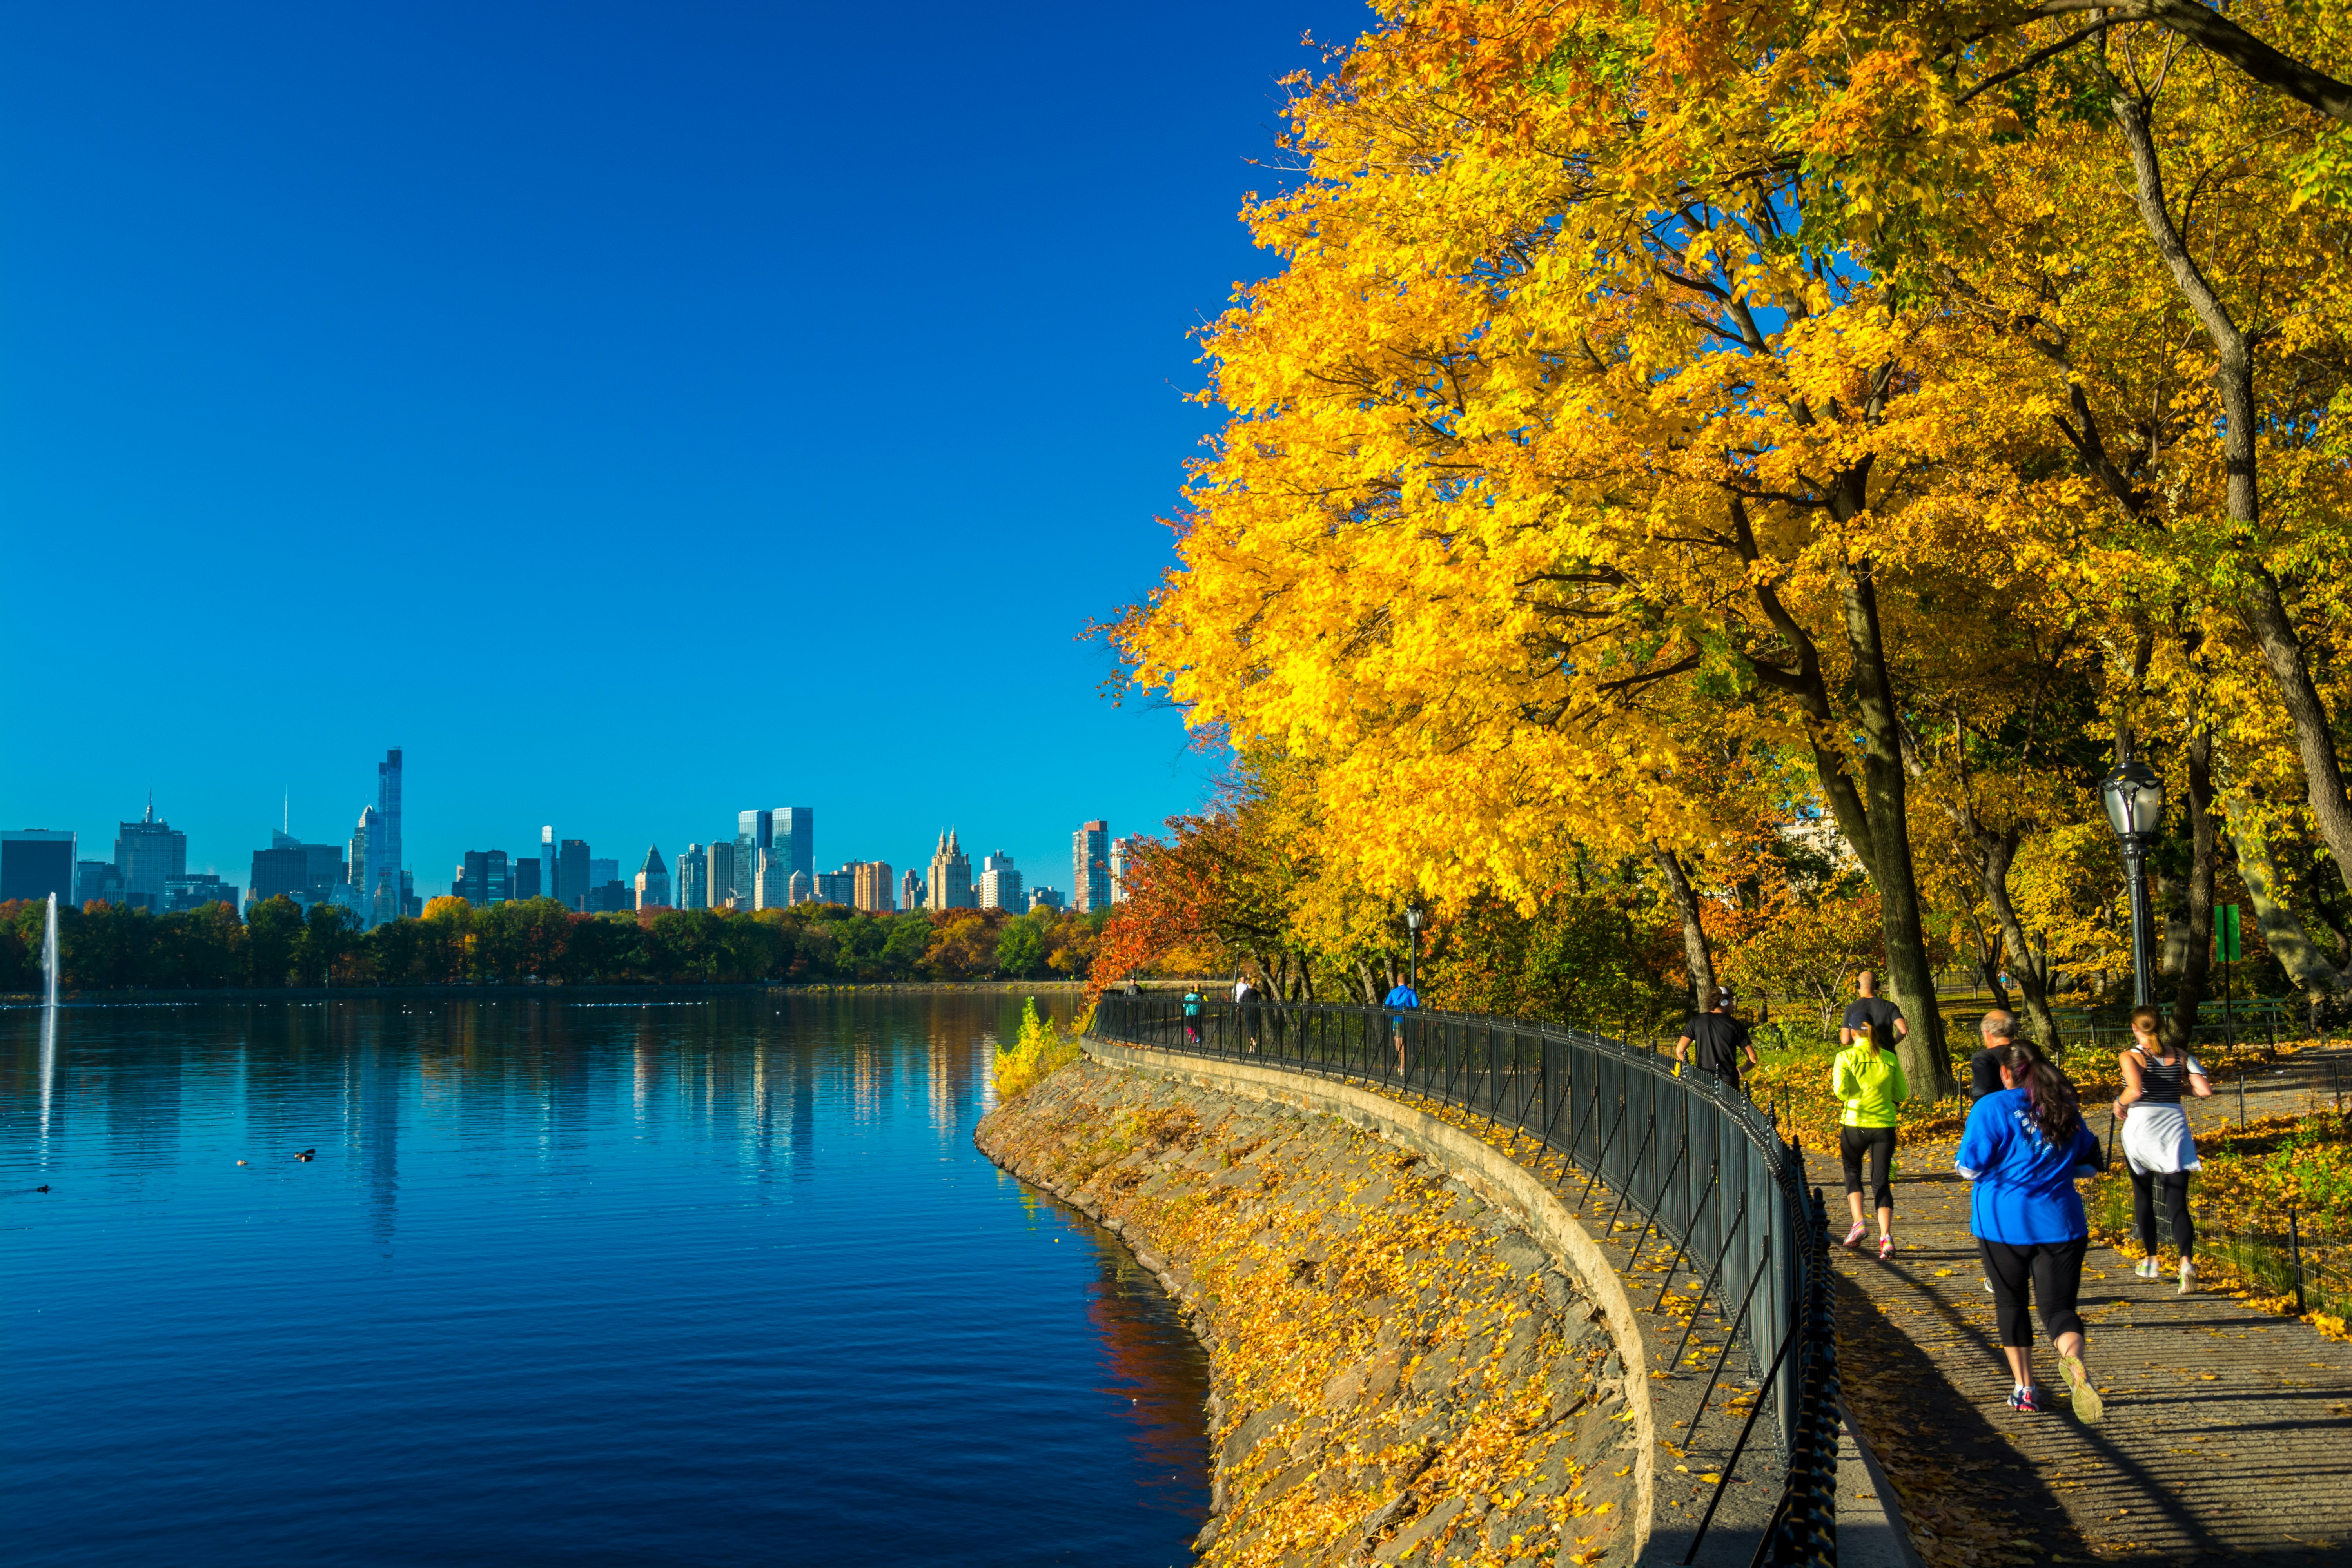 Several people are running on a path alongside the Jacqueline Kennedy Onassis Reservoir in Central Park, New York. It's fall, and the leaves on the trees lining the path are golden yellow.